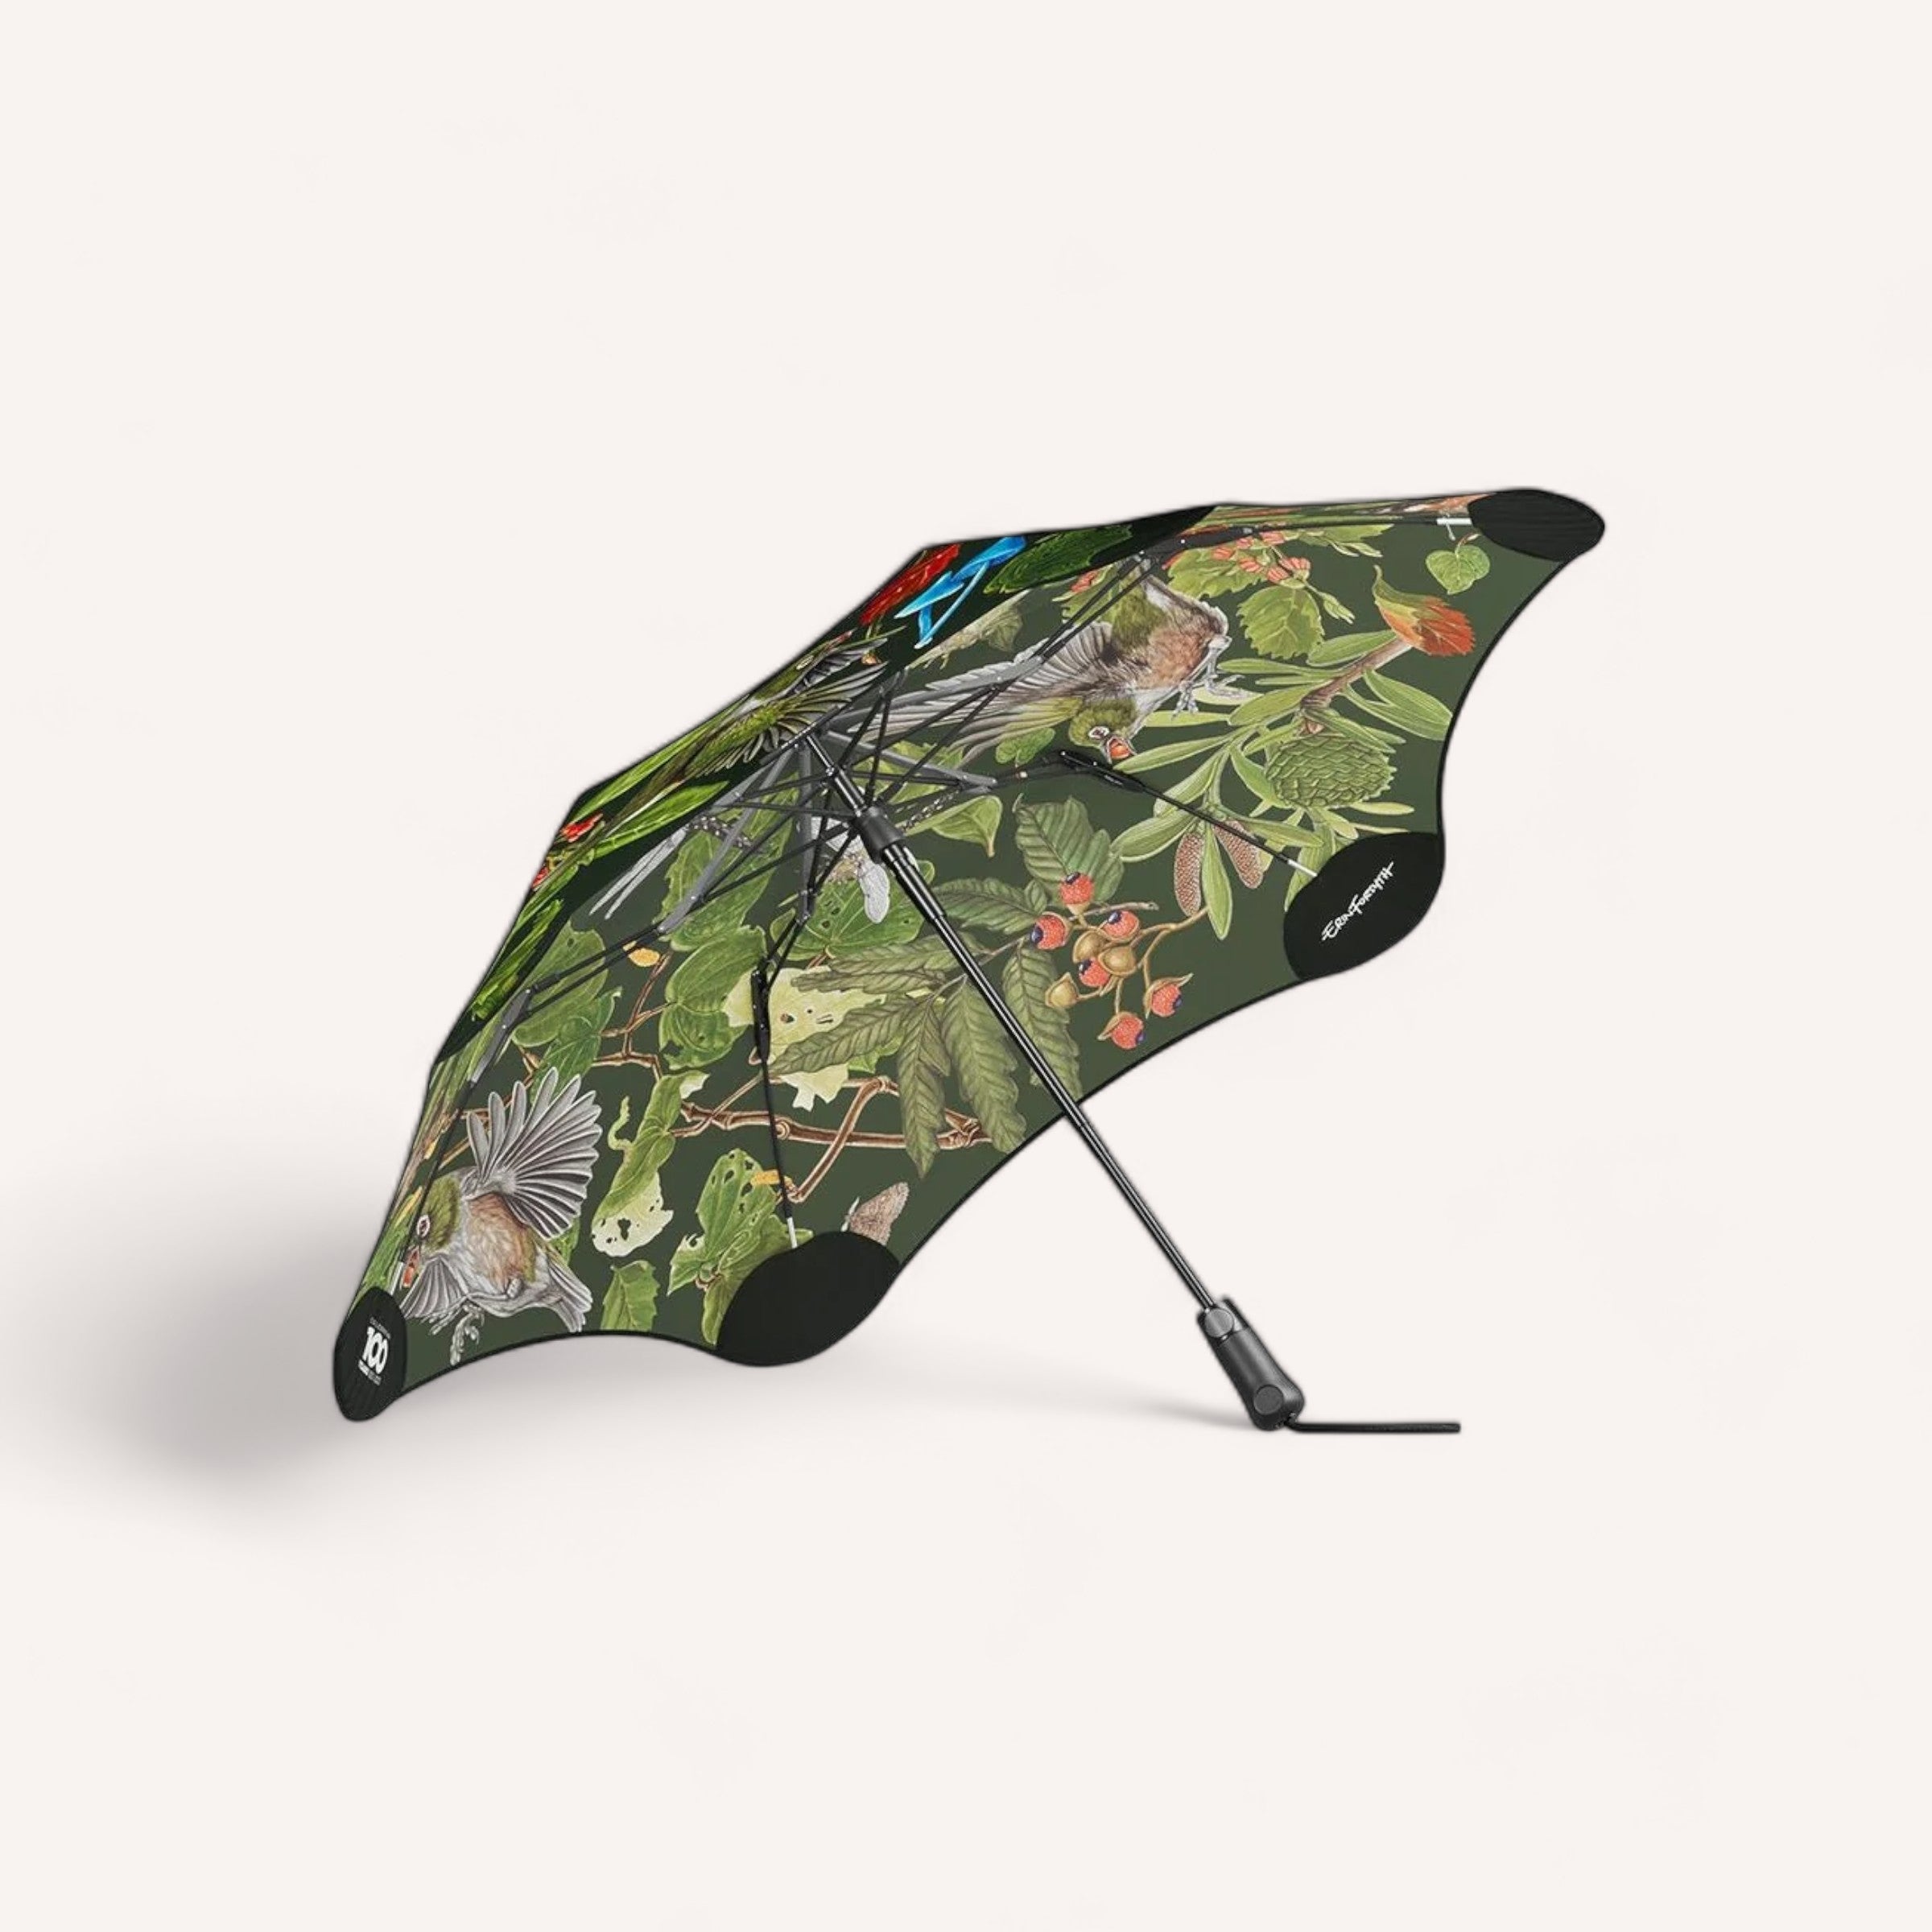 An open compact BLUNT Metro umbrella featuring the Blunt Metro Umbrella Forest & Bird - Limited Edition design stands against a white background, showcasing a mixture of flora and fauna in a colorful illustration.